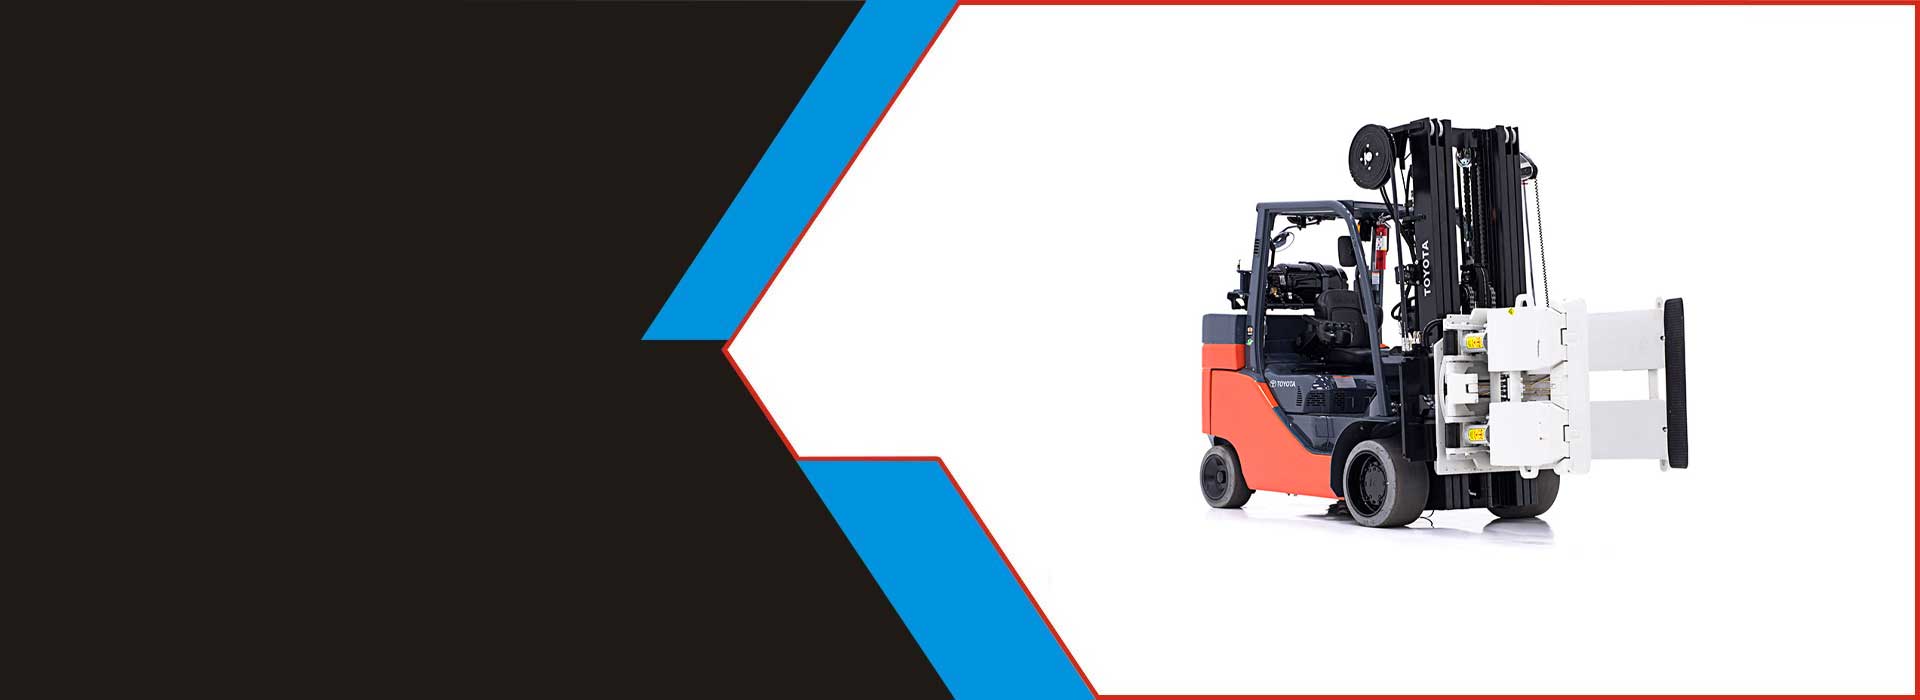 Forklift Attachments Supplier in Chakan, Ankleshwar, Bharuch, Gujarat India-Asian Engineering Group